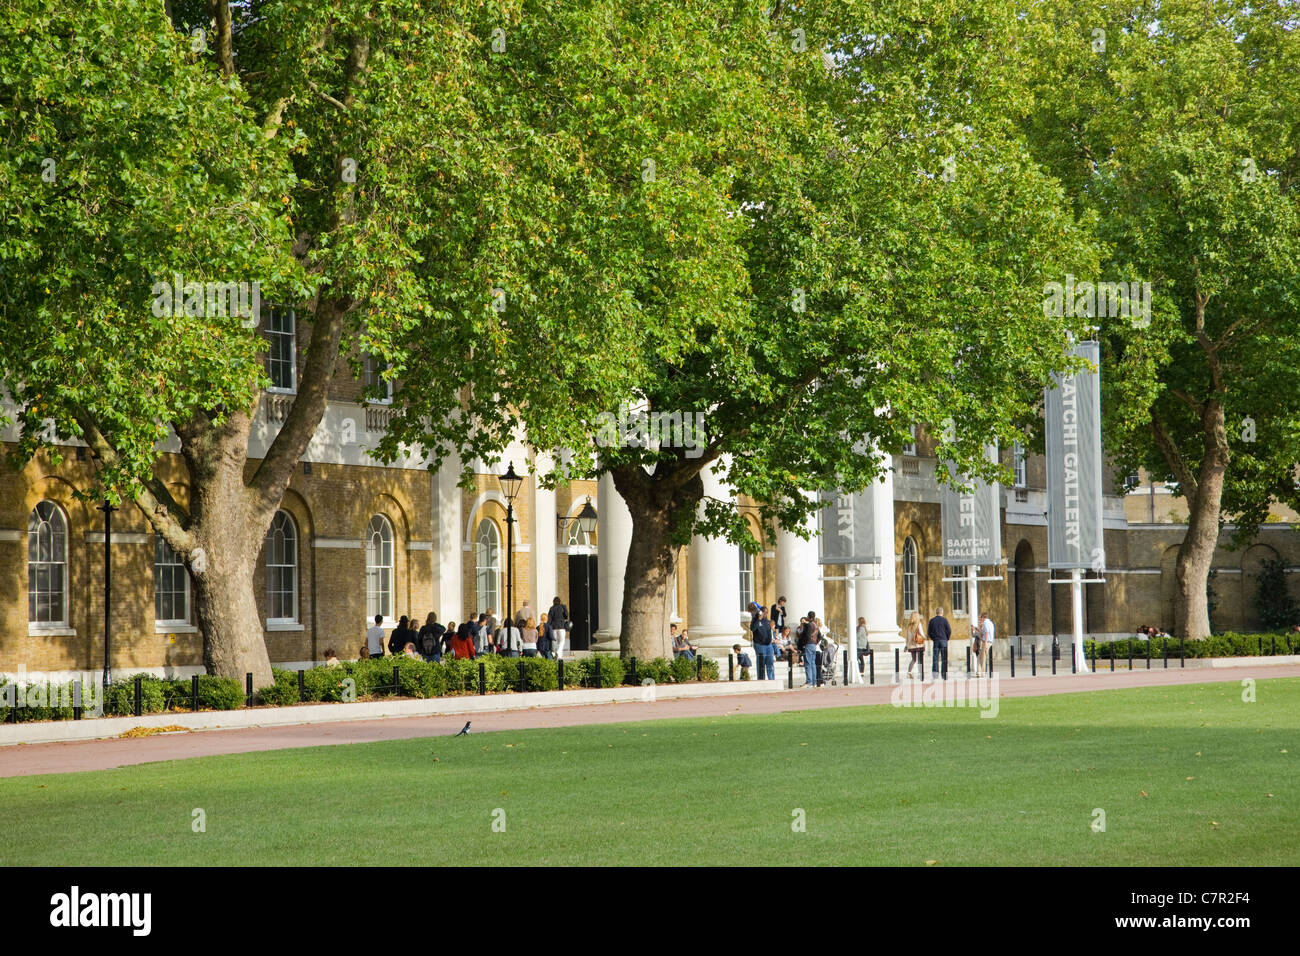 Saatchi Gallery London High Resolution Stock Photography and Images - Alamy